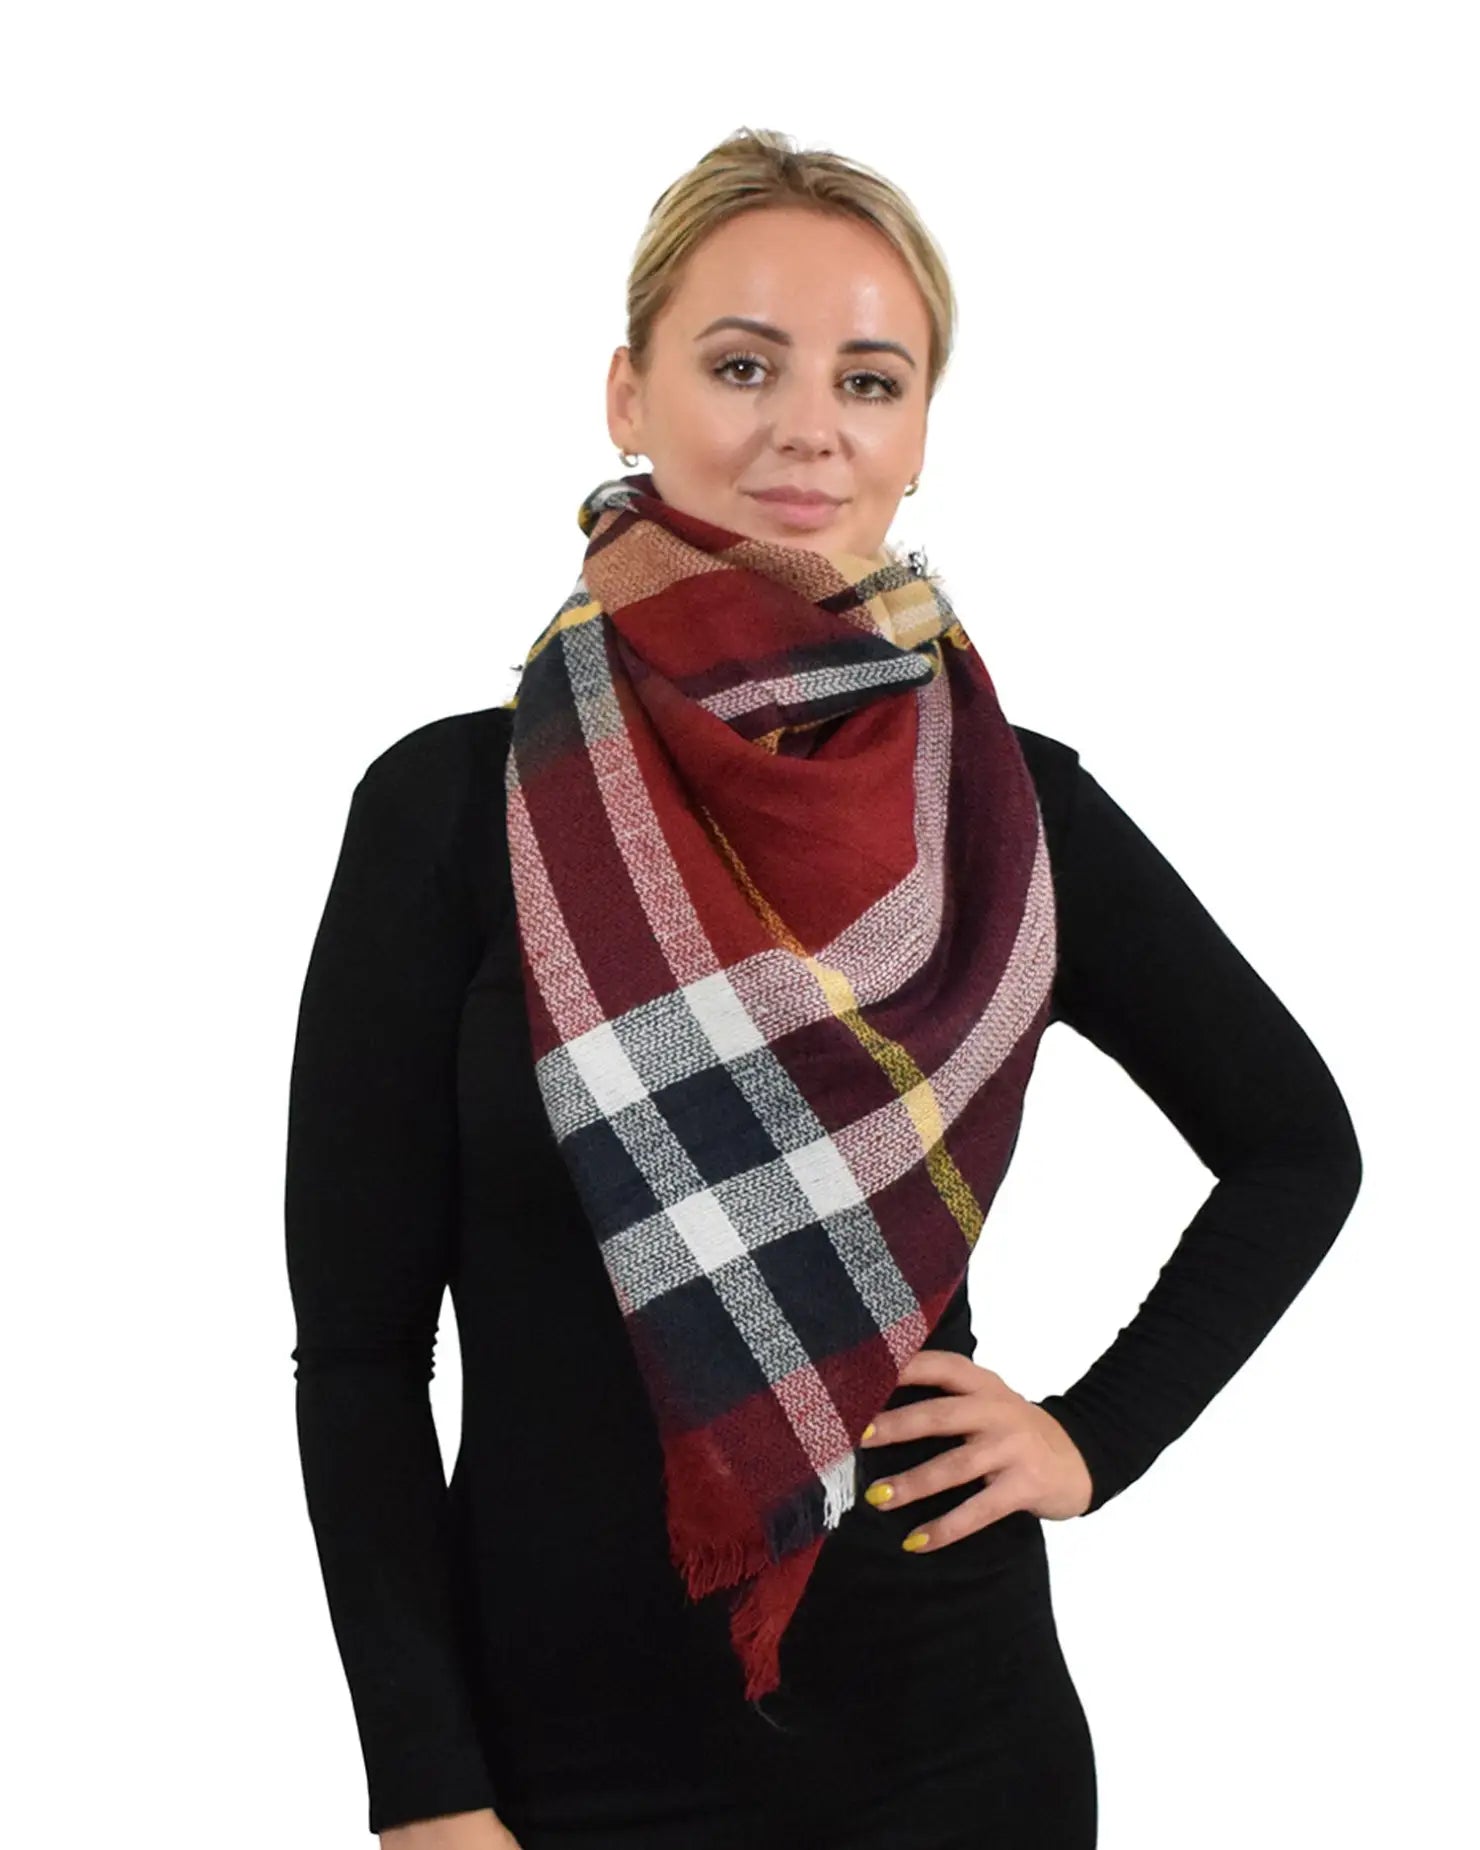 Oversized Tartan Check Winter Blanket Poncho - Woman wearing burgundy and white plaid scarf